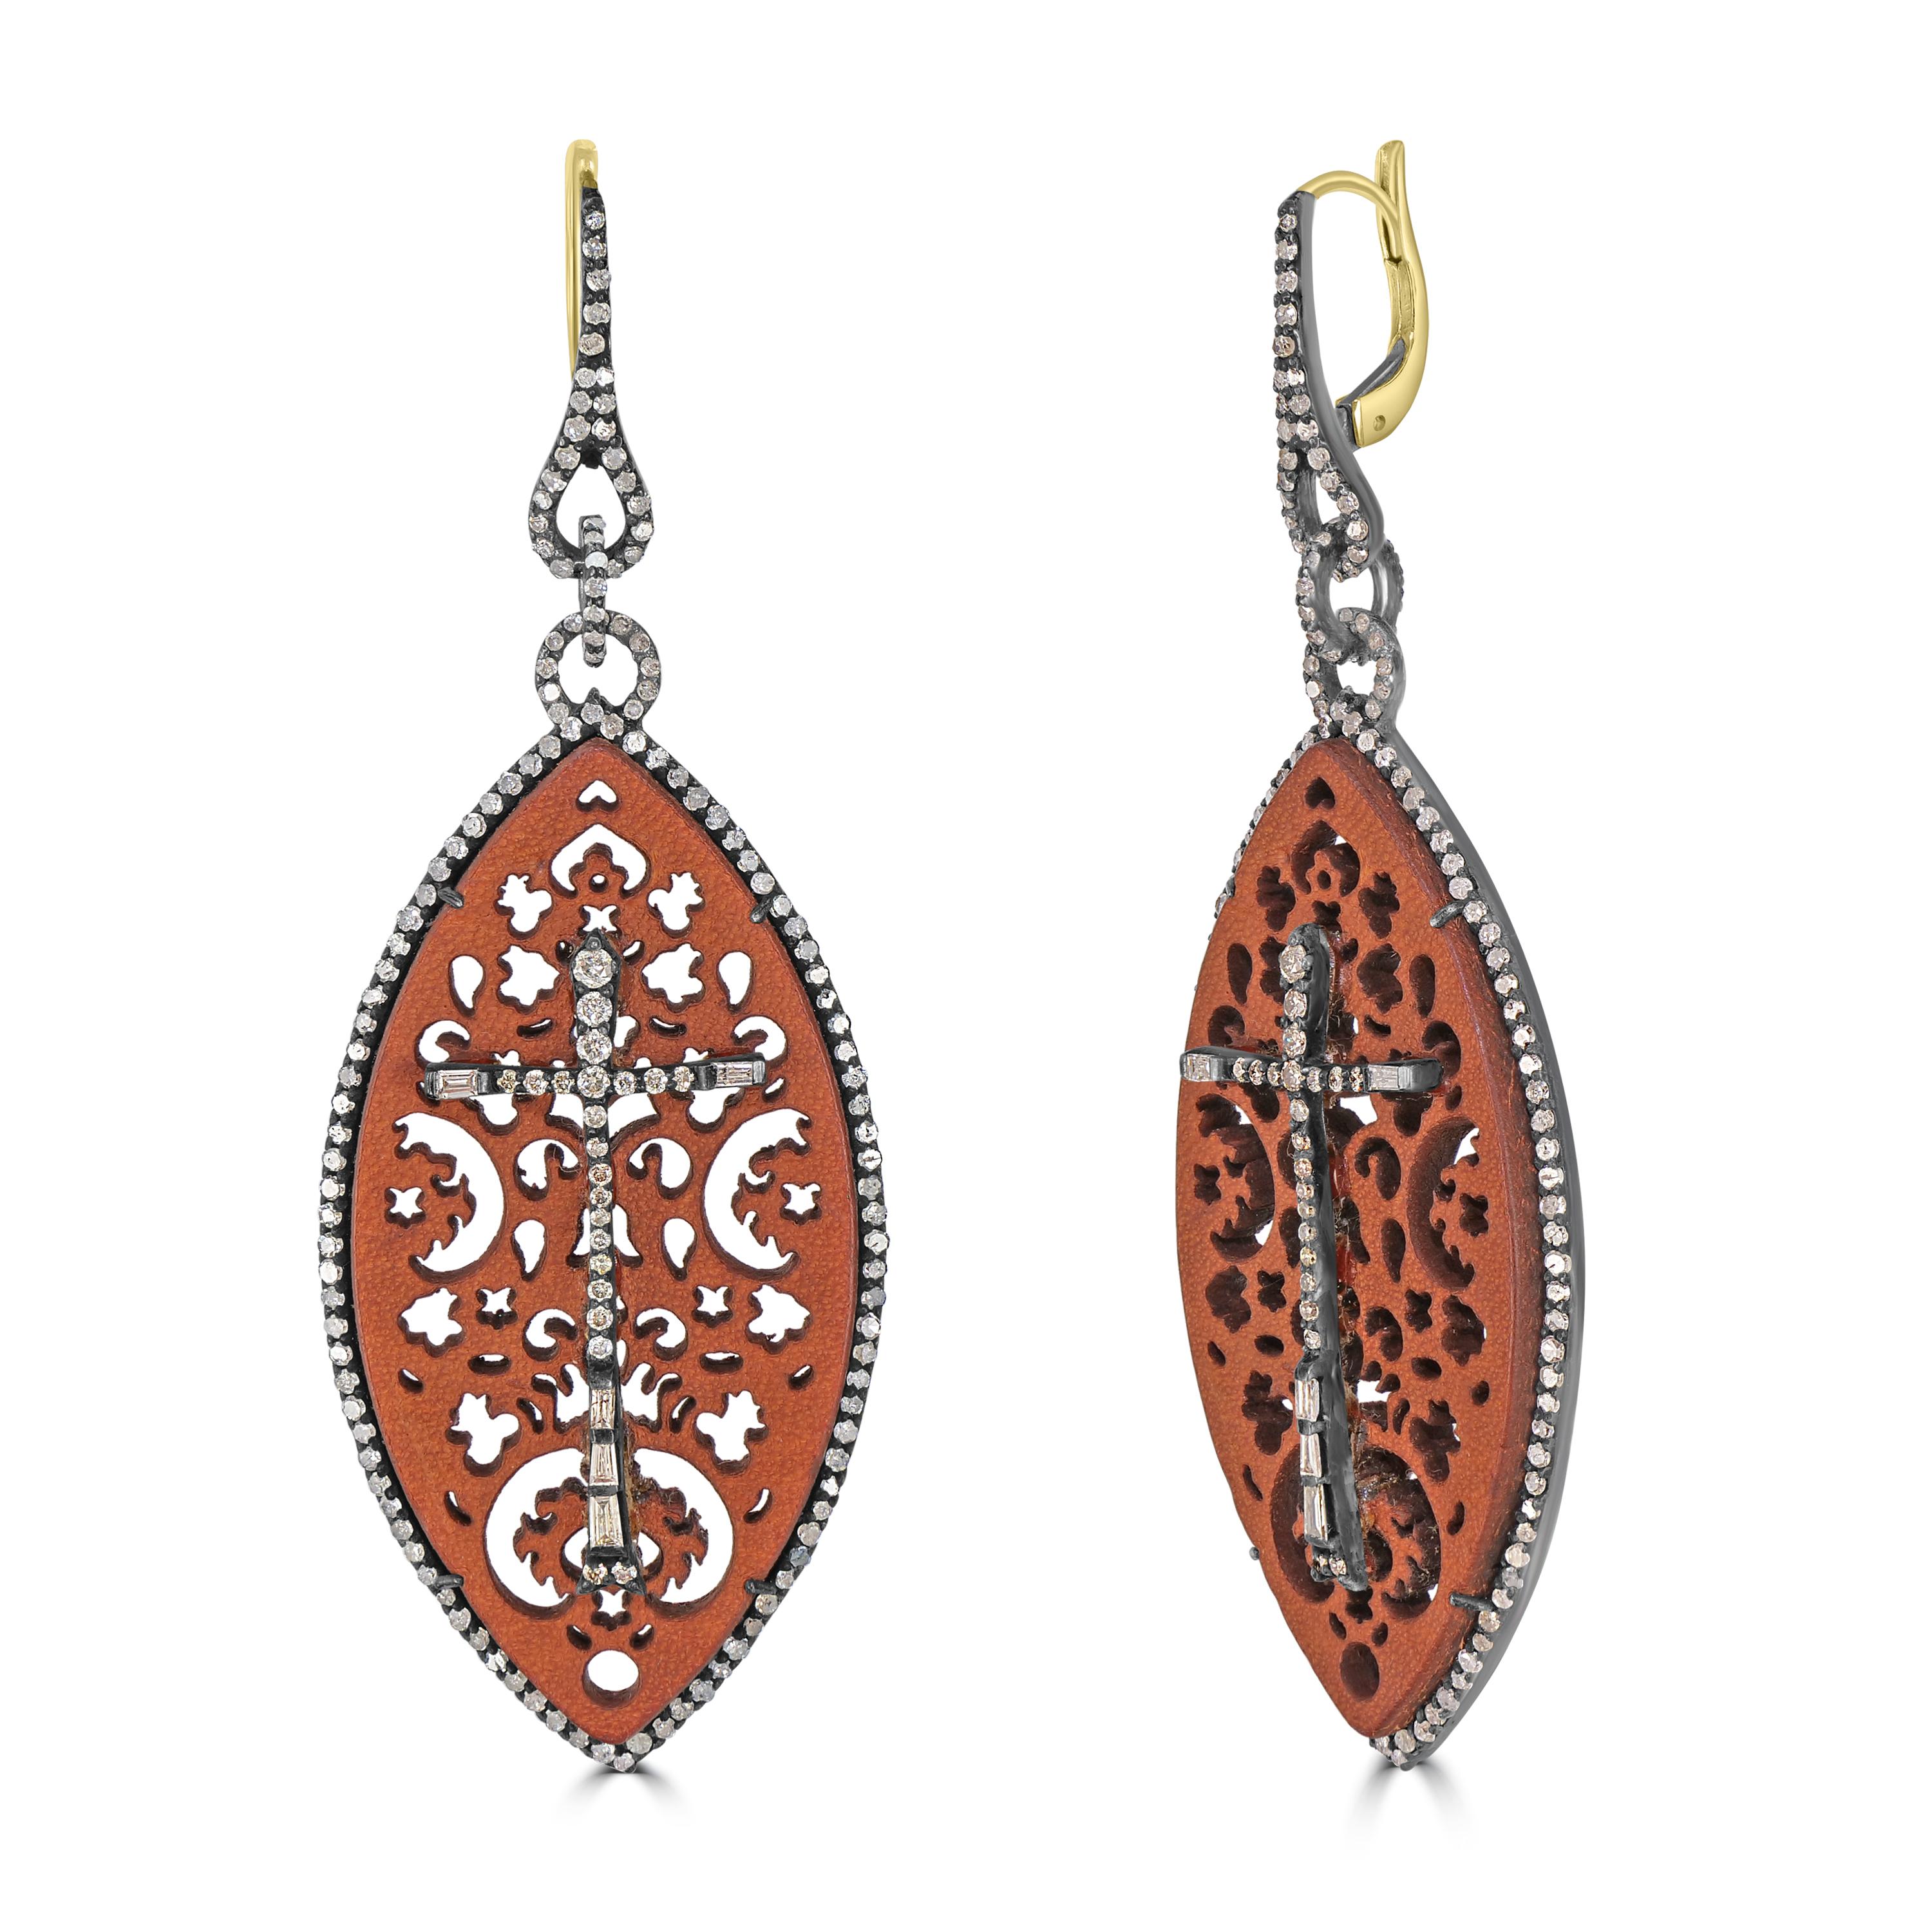 Indulge in the exquisite elegance of the Victorian 3.19 Cttw. Filigree Drop Earrings, a harmonious fusion of timeless design and contemporary allure. Crafted in 18k gold and sterling silver, these earrings feature a marquise drop of luxurious brown